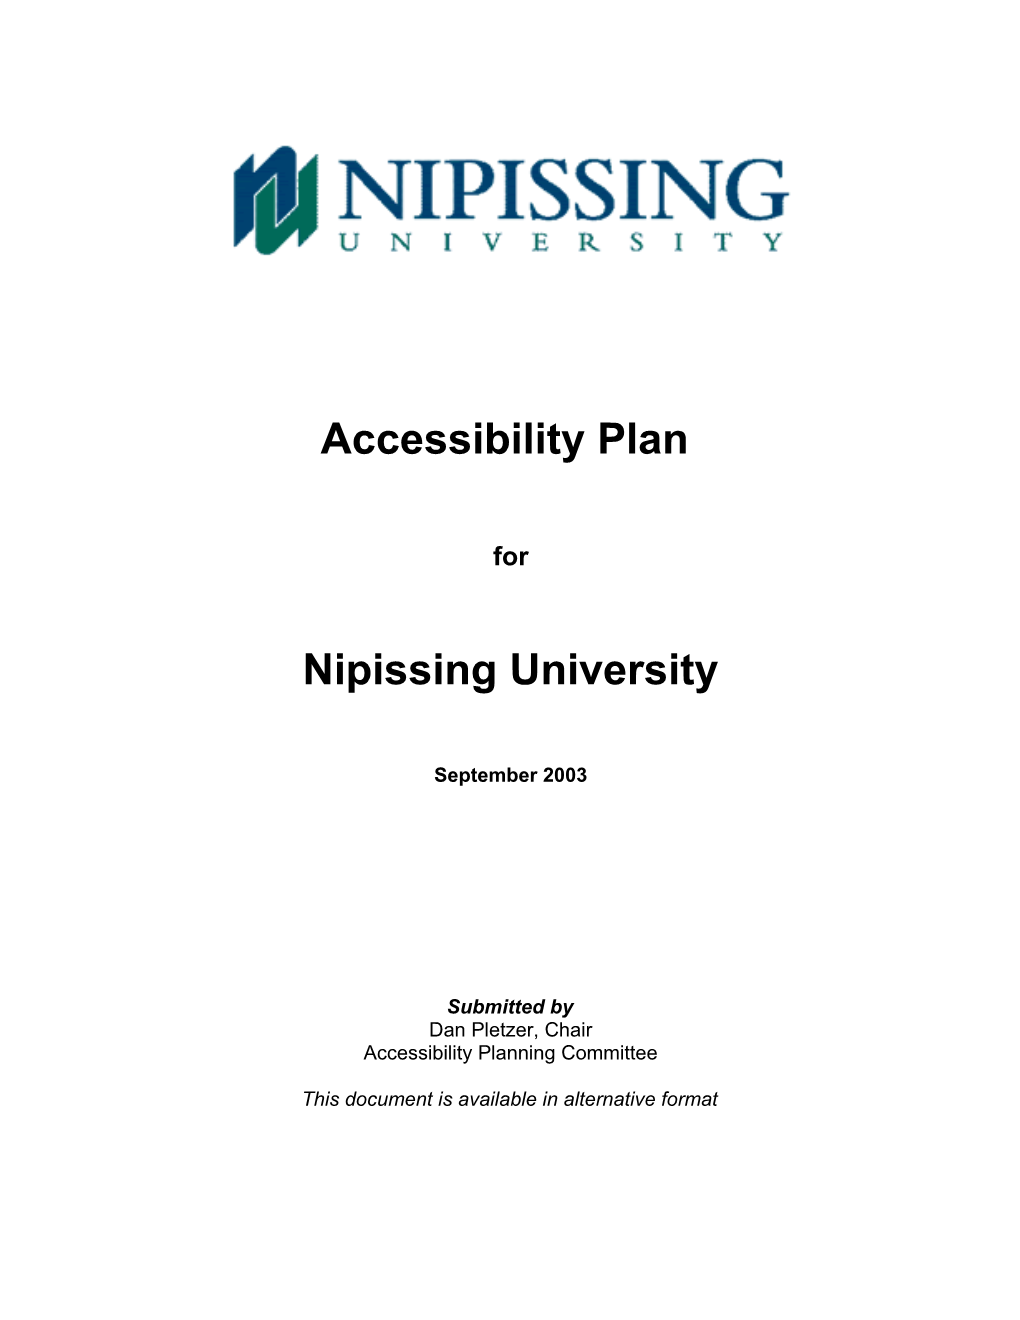 Sample Annual Accessibility Plan s1